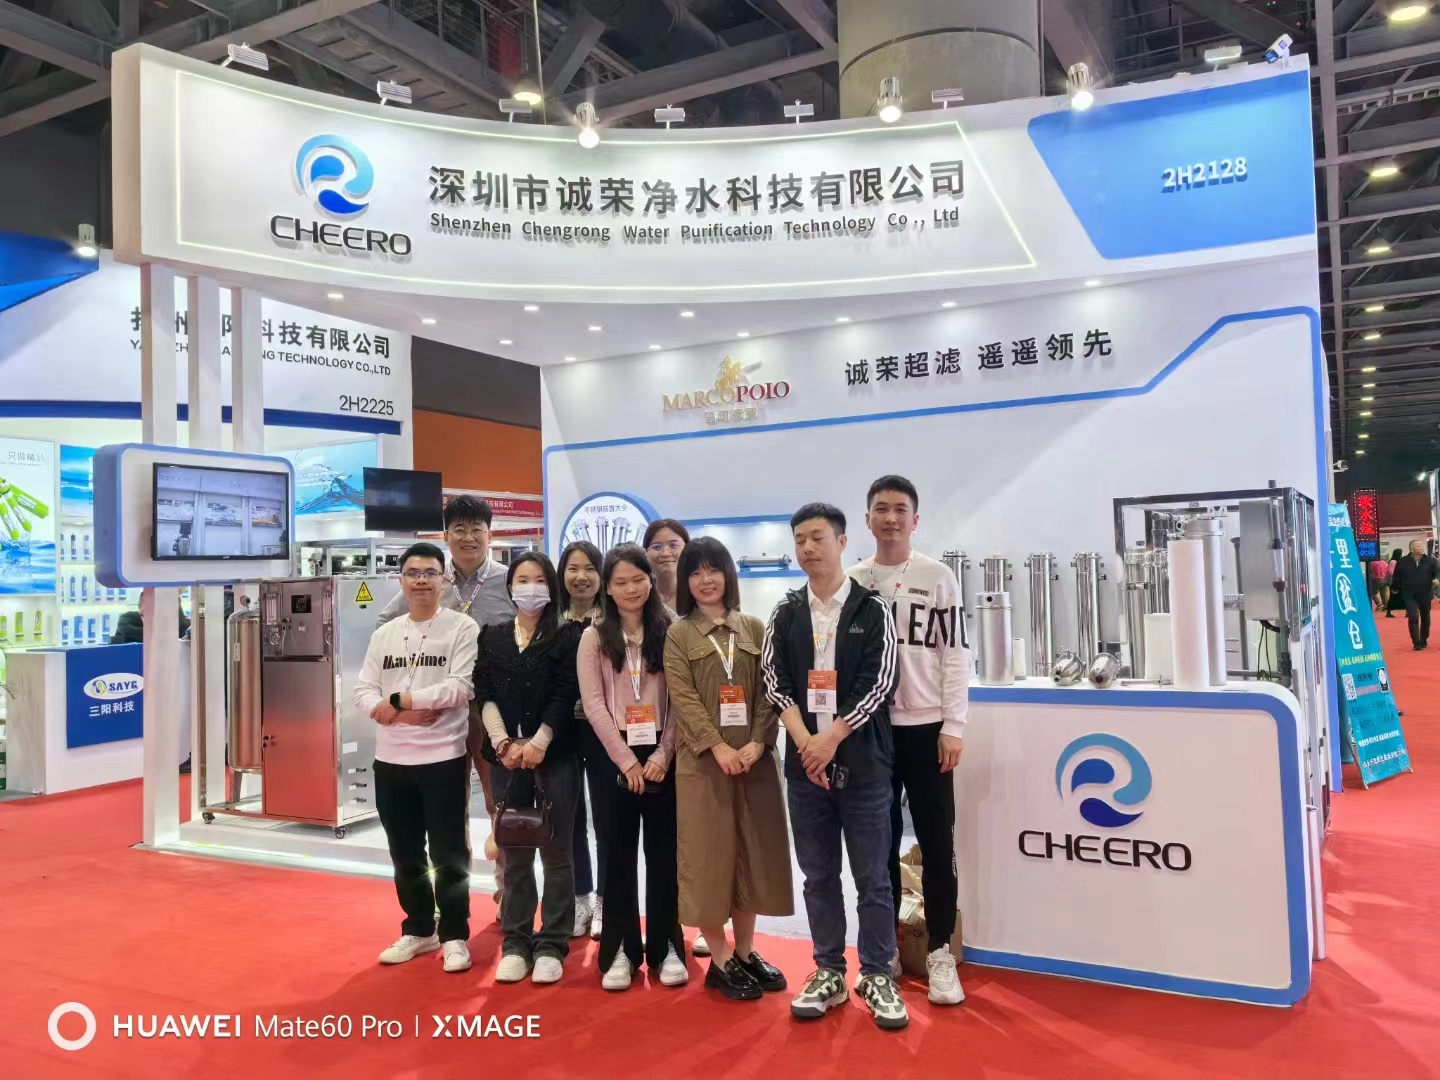 Shenzhen Chengrong Steals the Show at Guangzhou Water Exhibition, Drawing Admiration from Top Traders Worldwide for Its Stainless Steel Water Purification Products